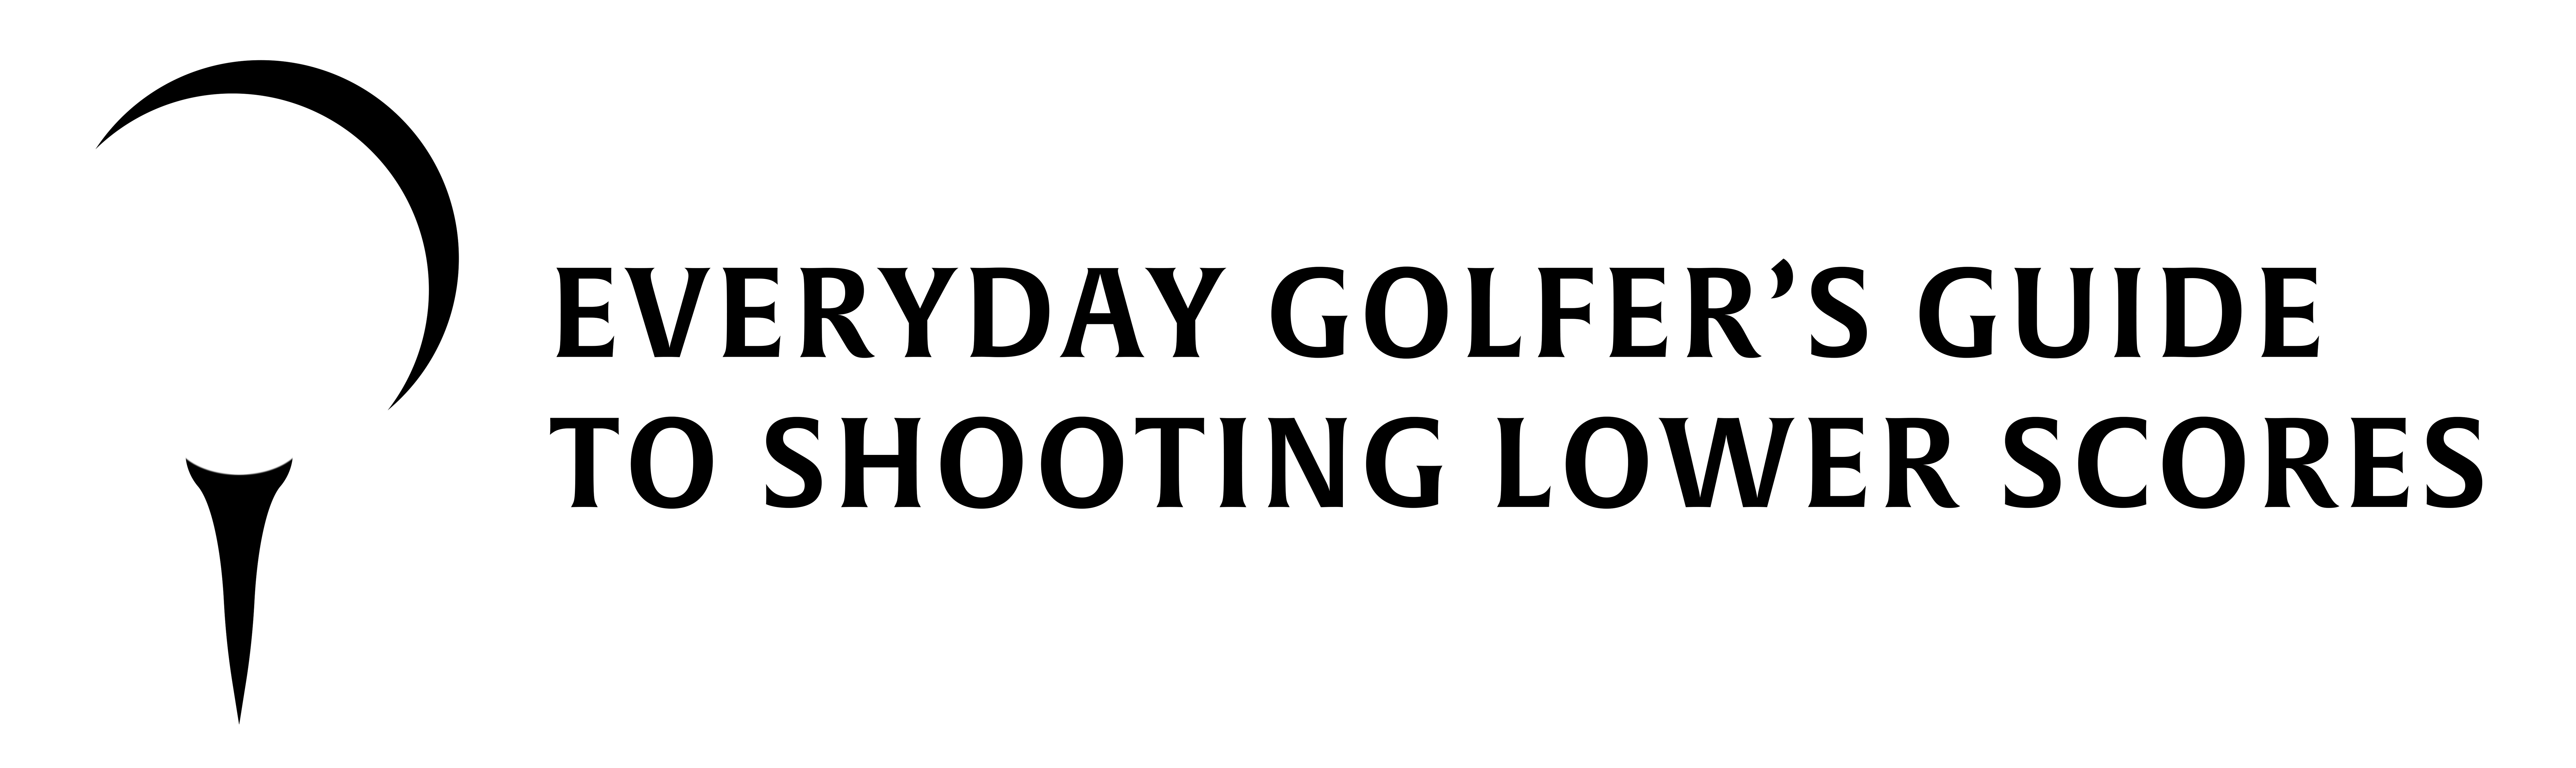 Everyday Golfer's Guide to Shooting Lower Scores